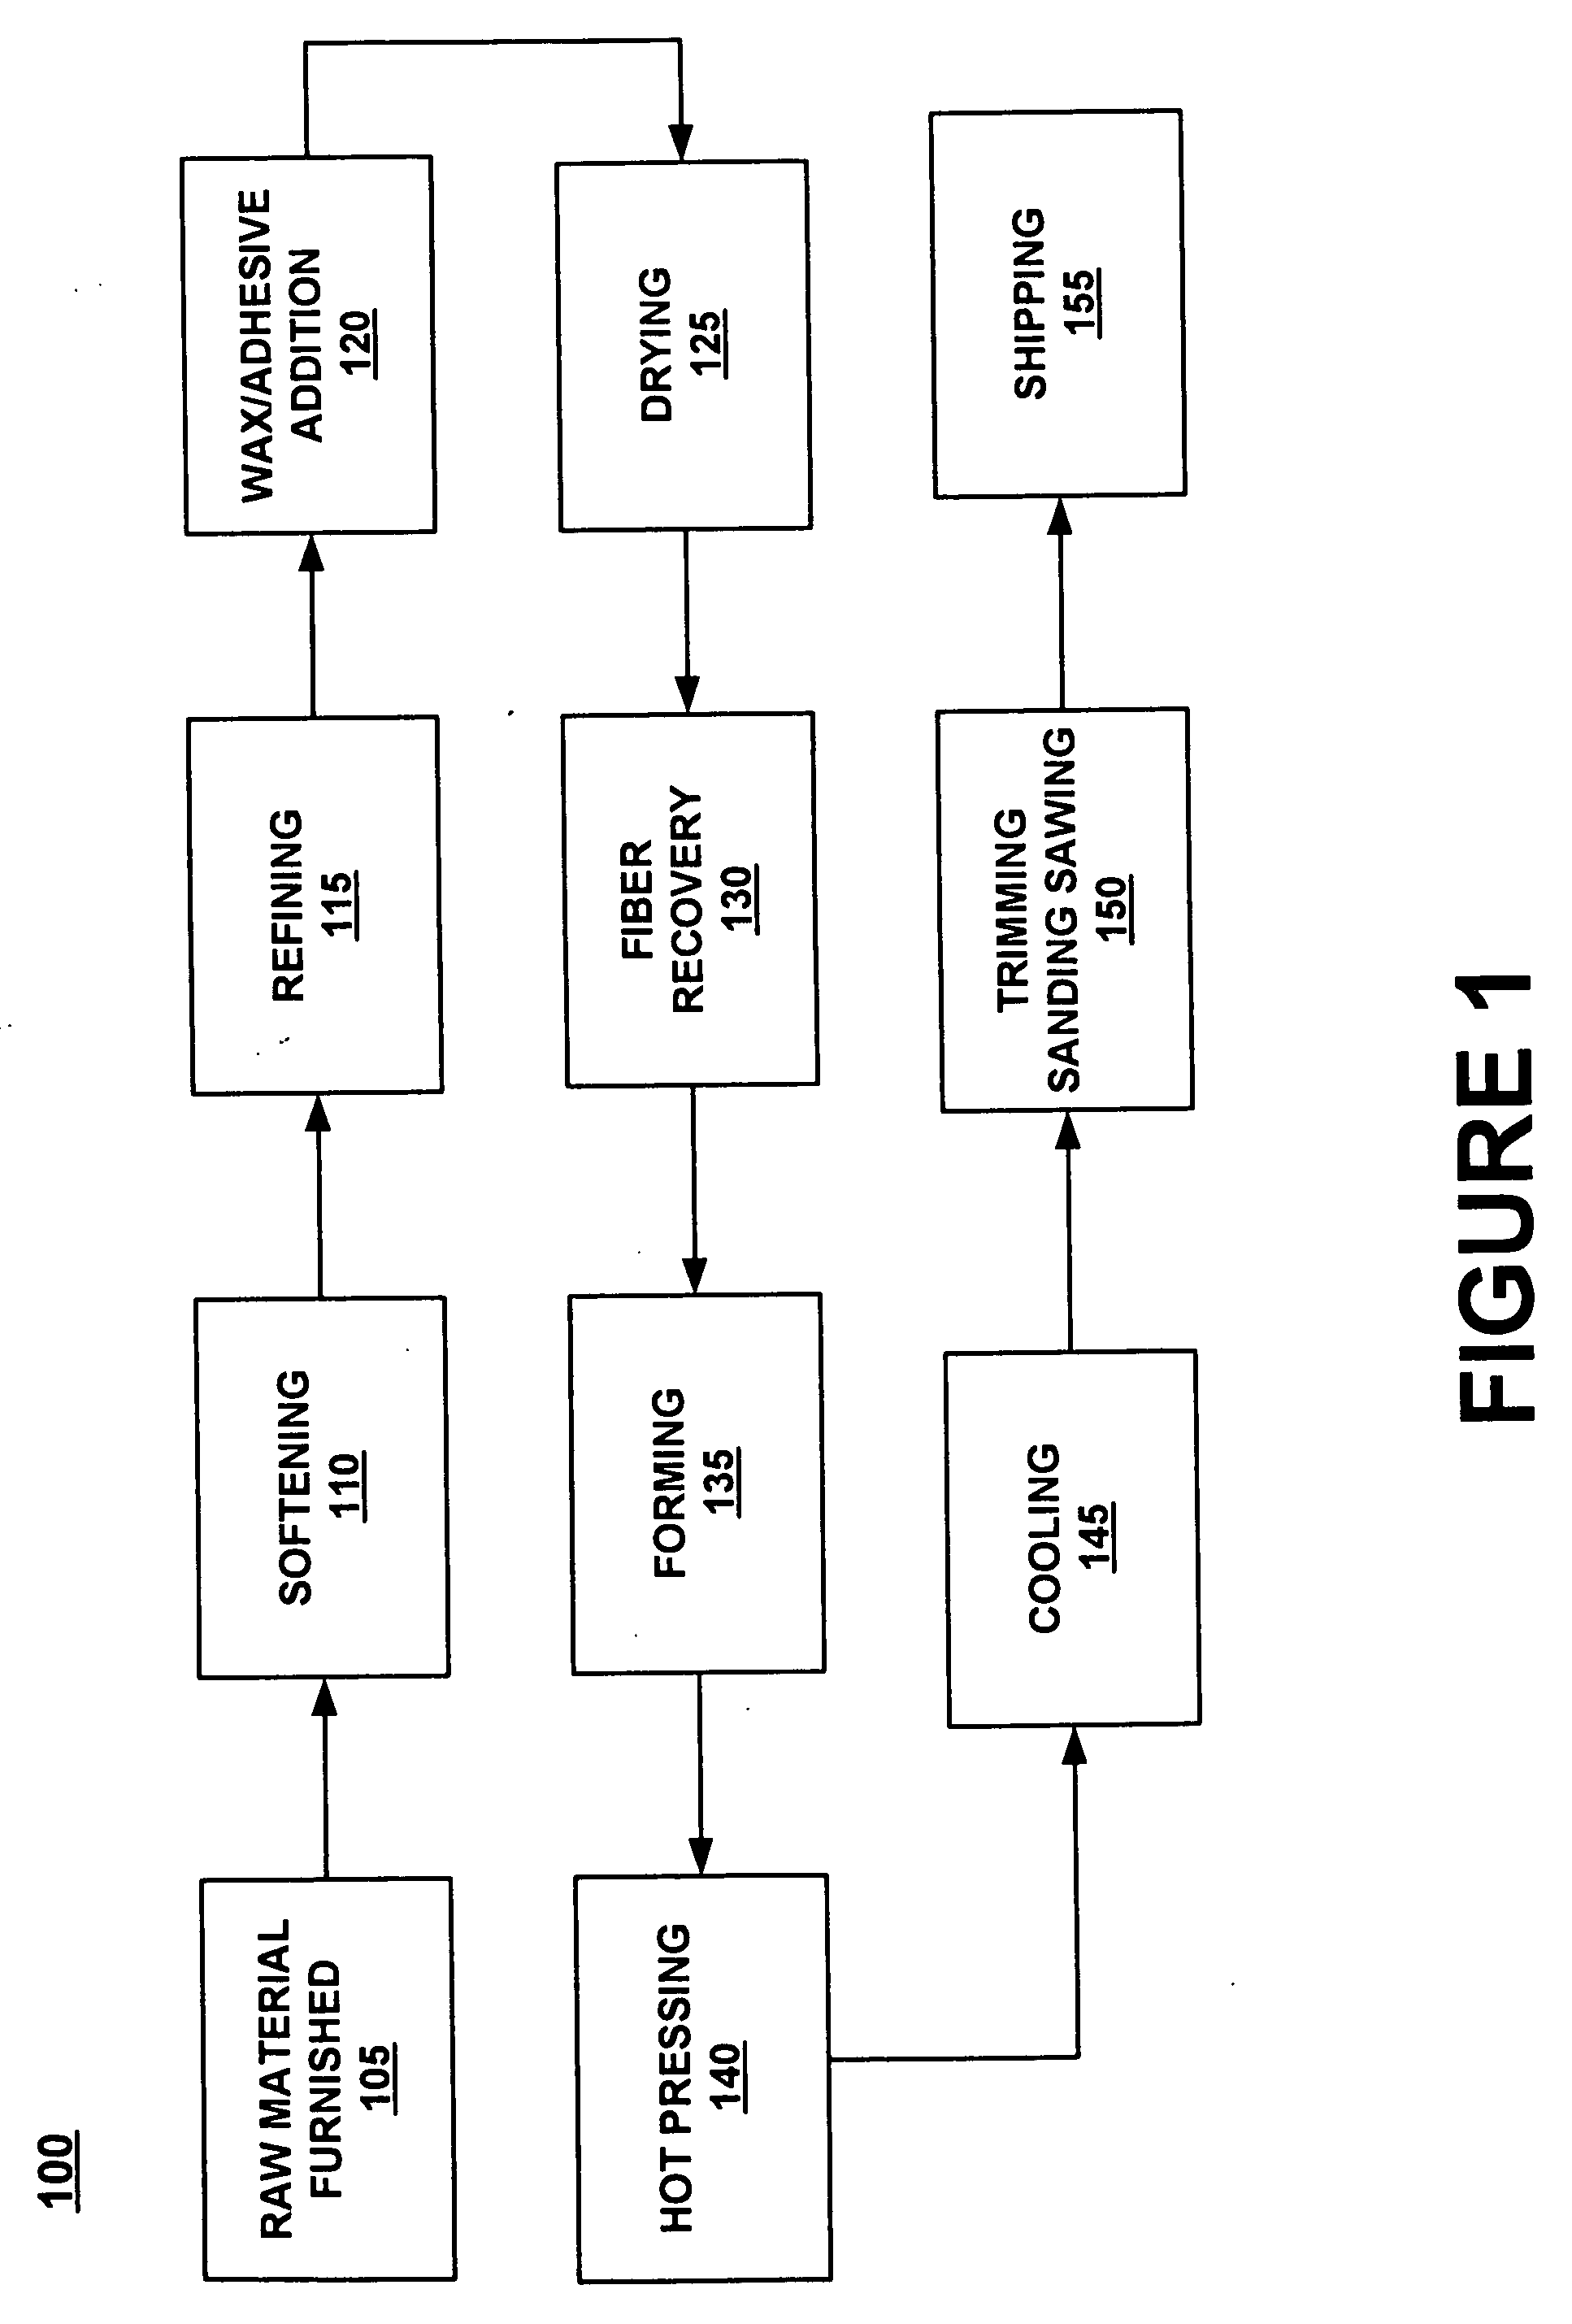 Fire retardant composite panel product and a method and system for fabricating same